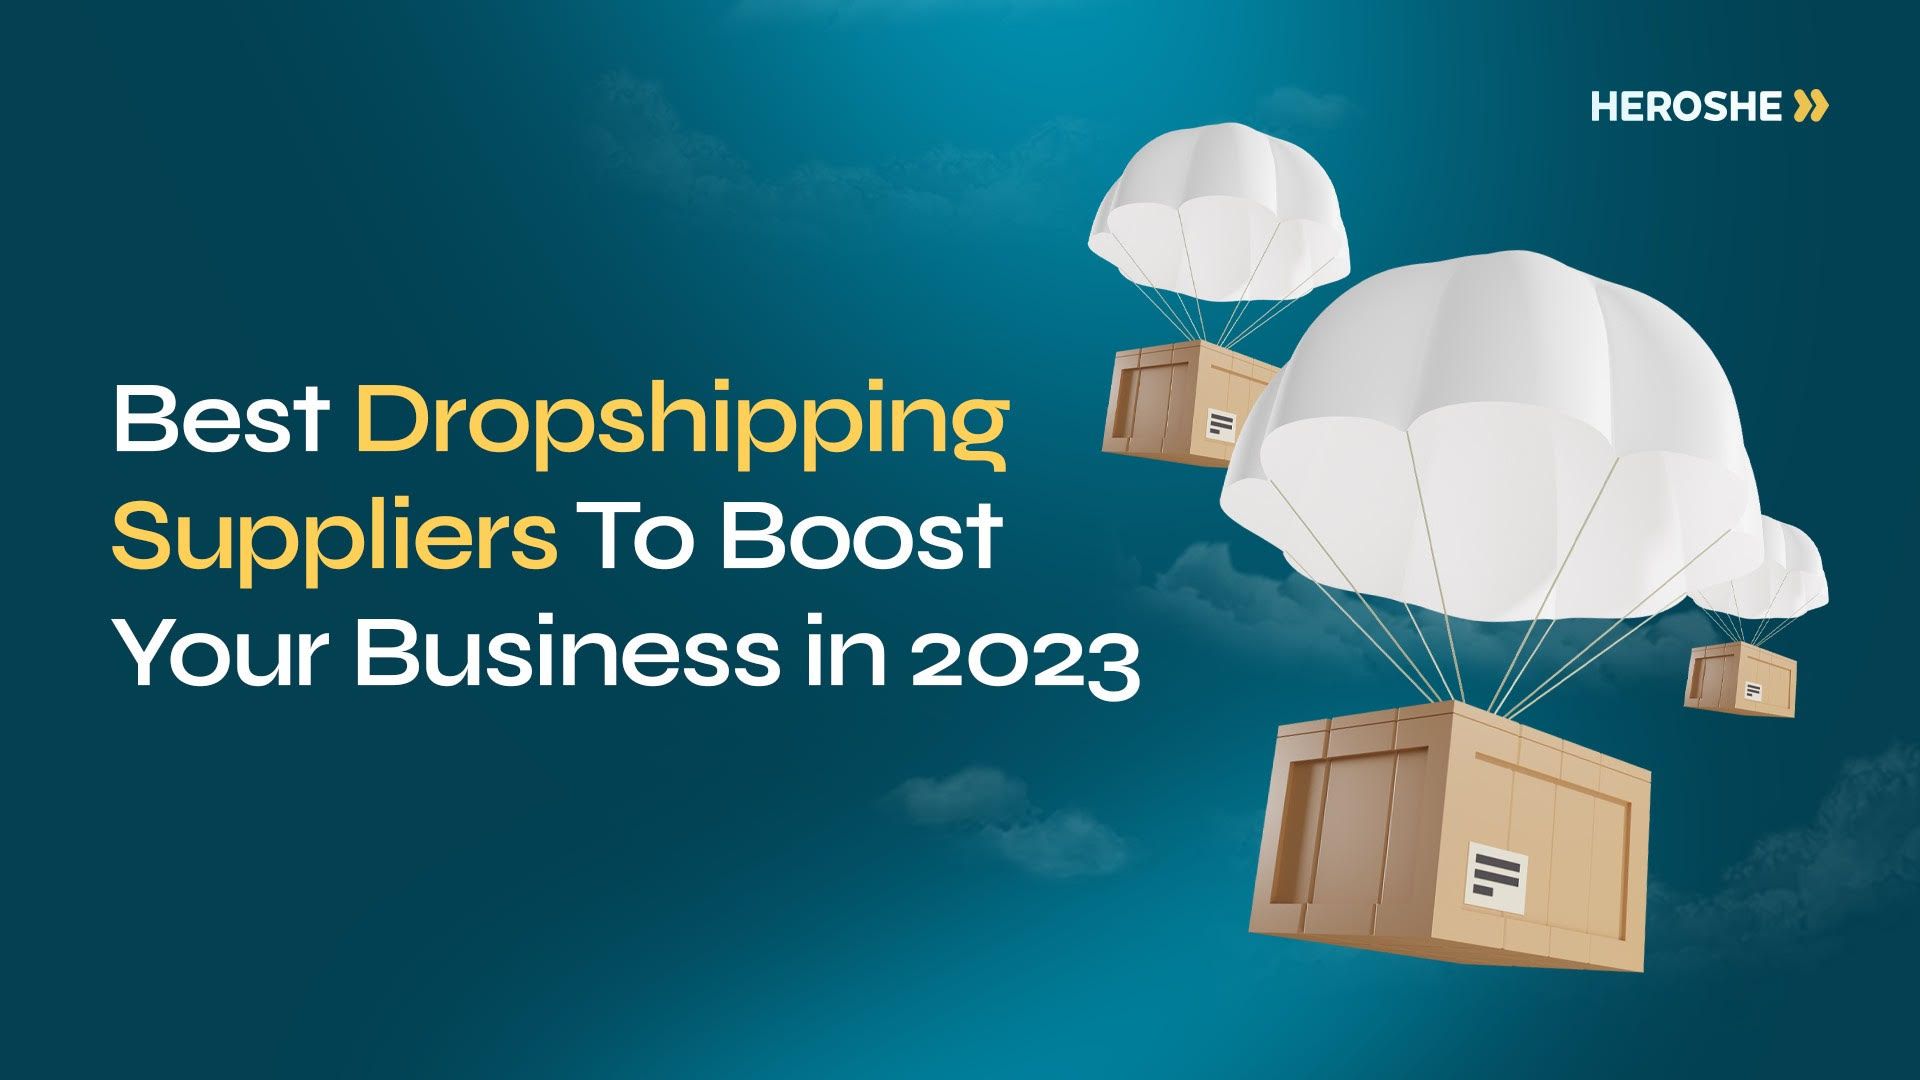 15 Best Dropshipping Suppliers To Boost Your Business in 2023